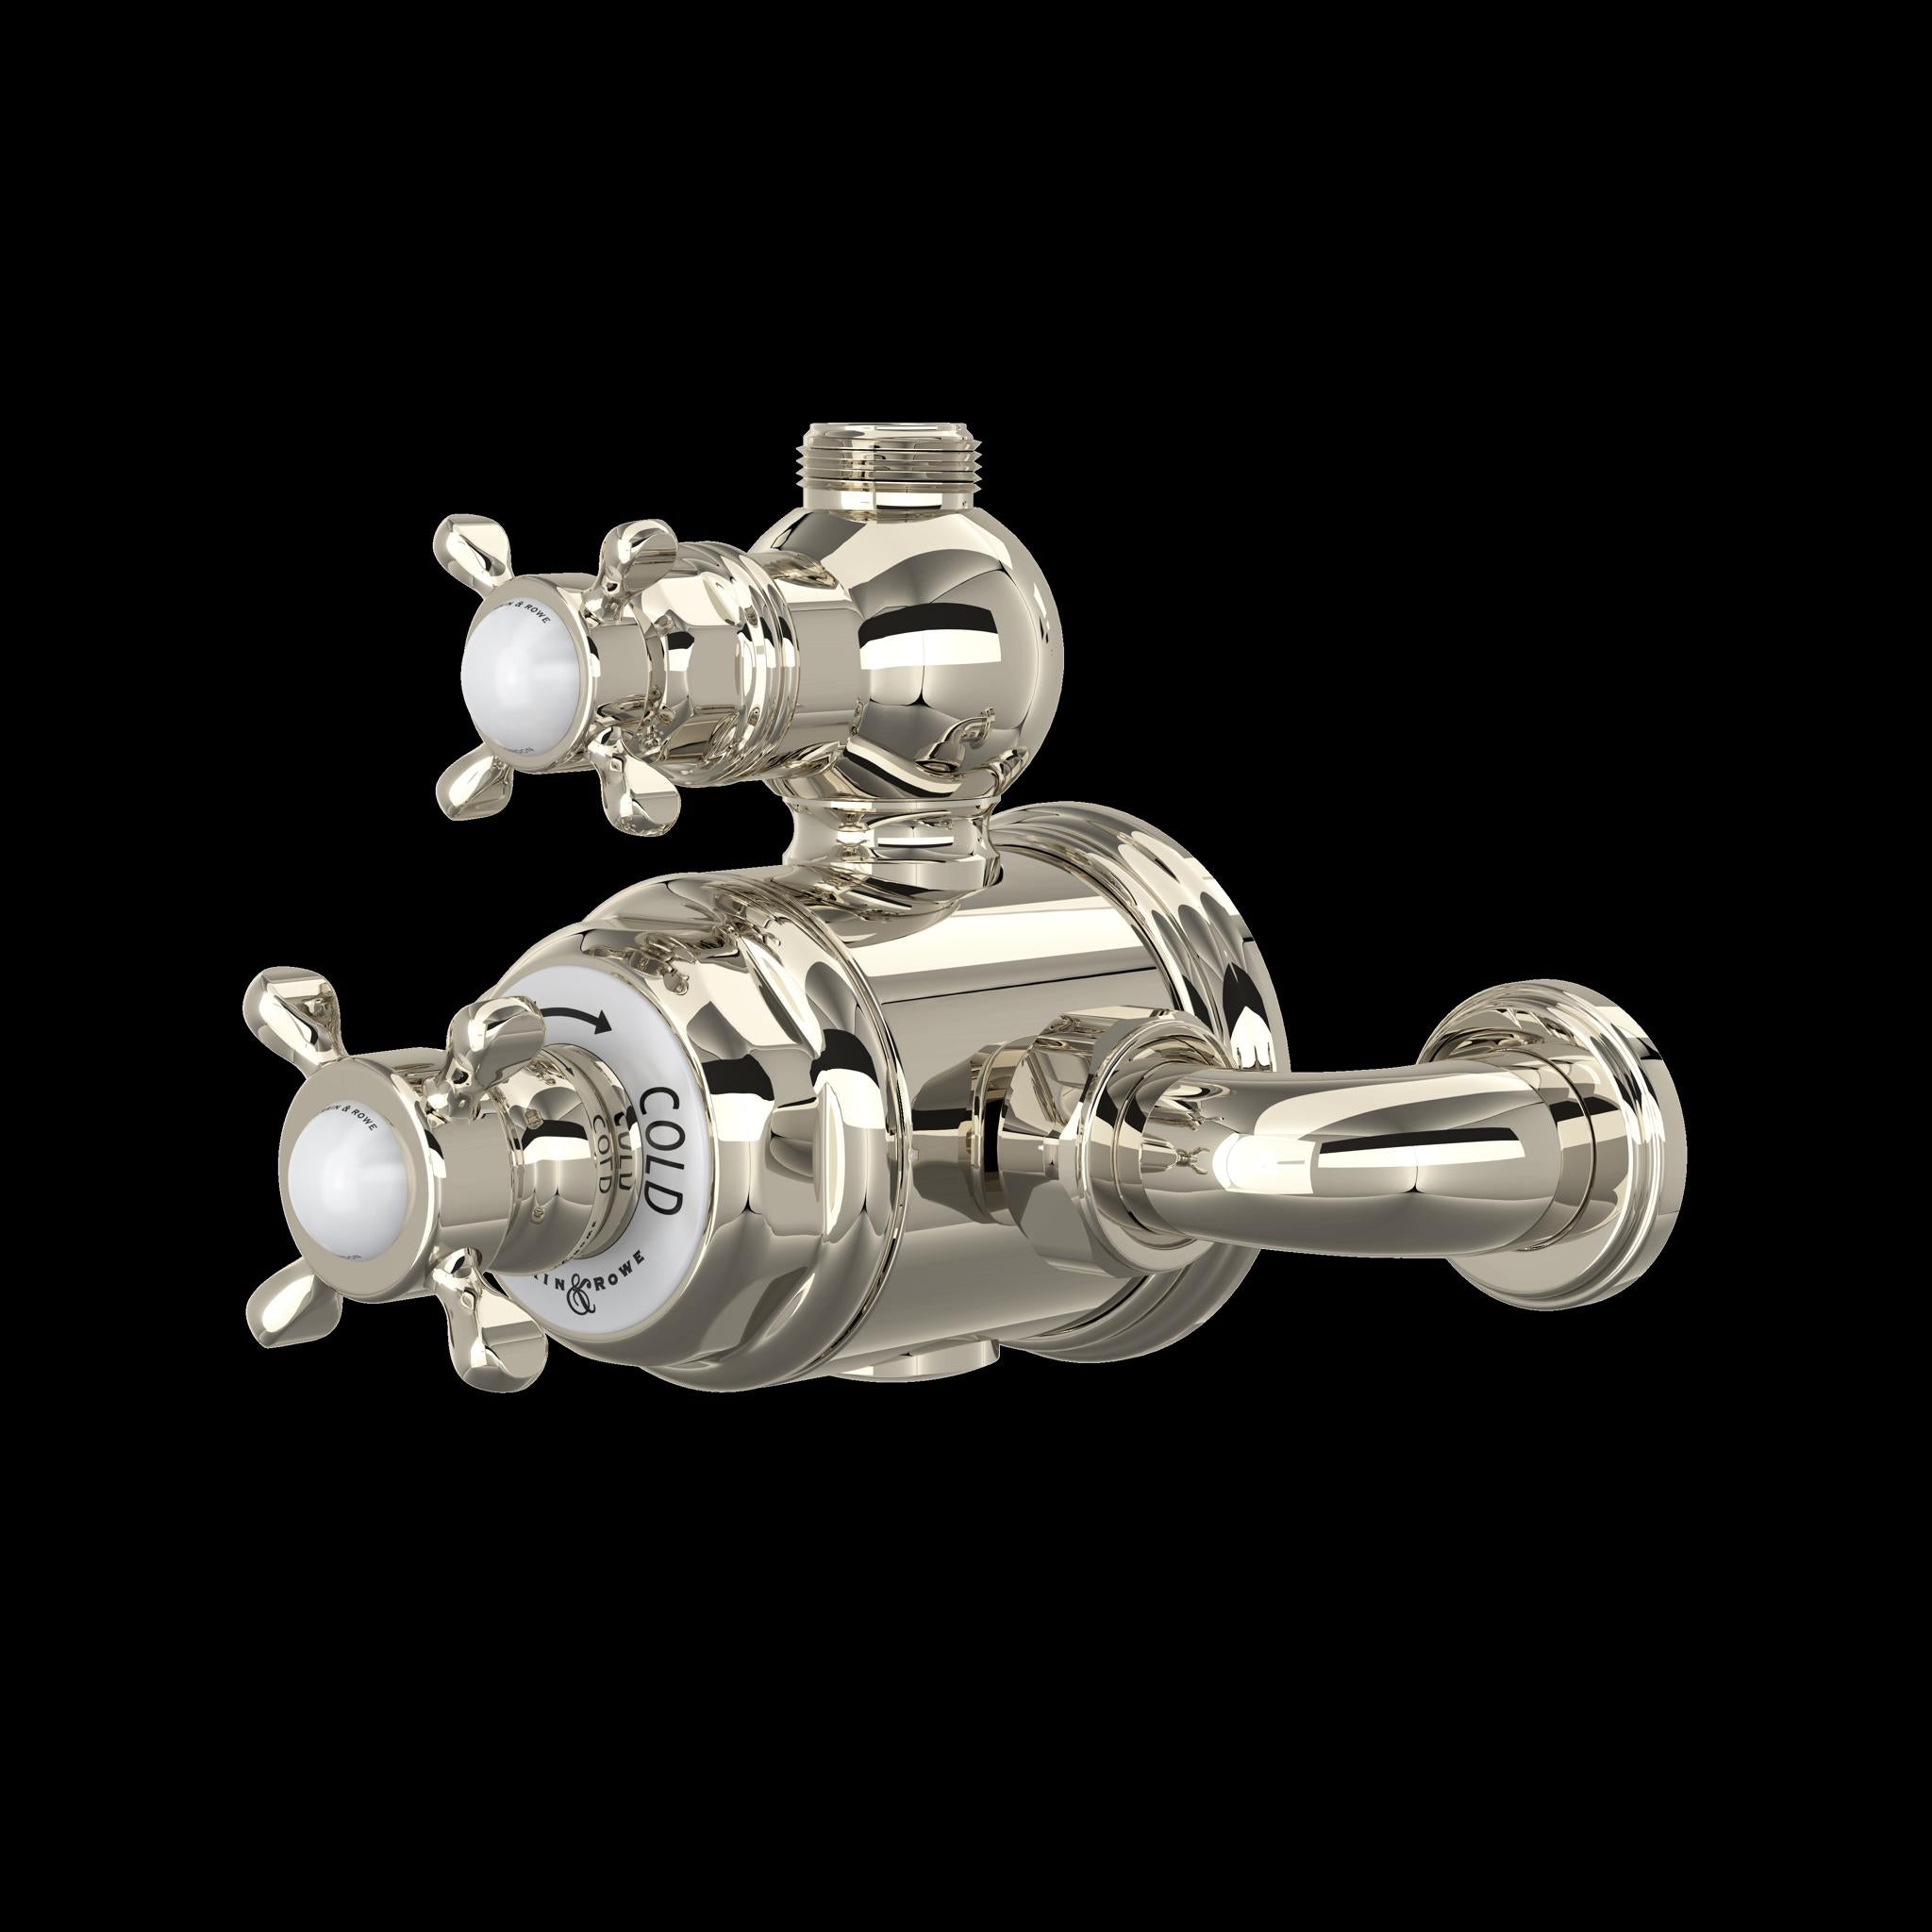 Perrin & Rowe U.5552 Edwardian 3/4" Exposed Therm Valve With Volume And Temperature Control